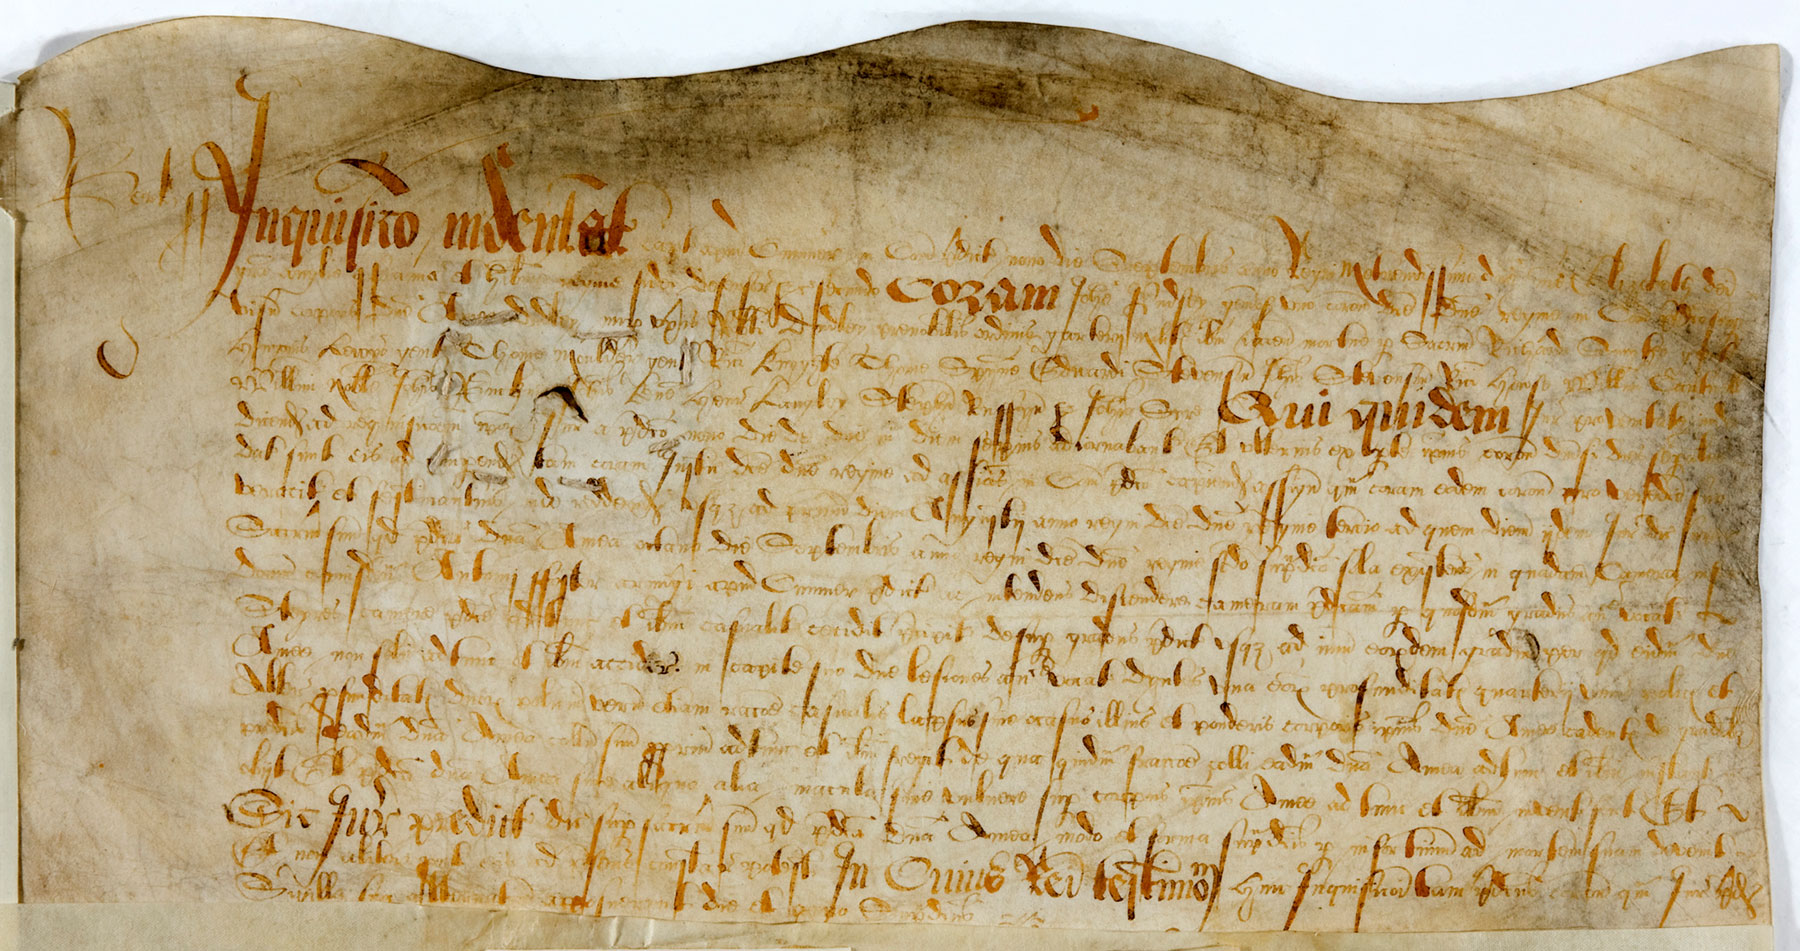 Coroner’s report into the death of Amy Robsart, August 1561 (KB 9/1073/f.80)